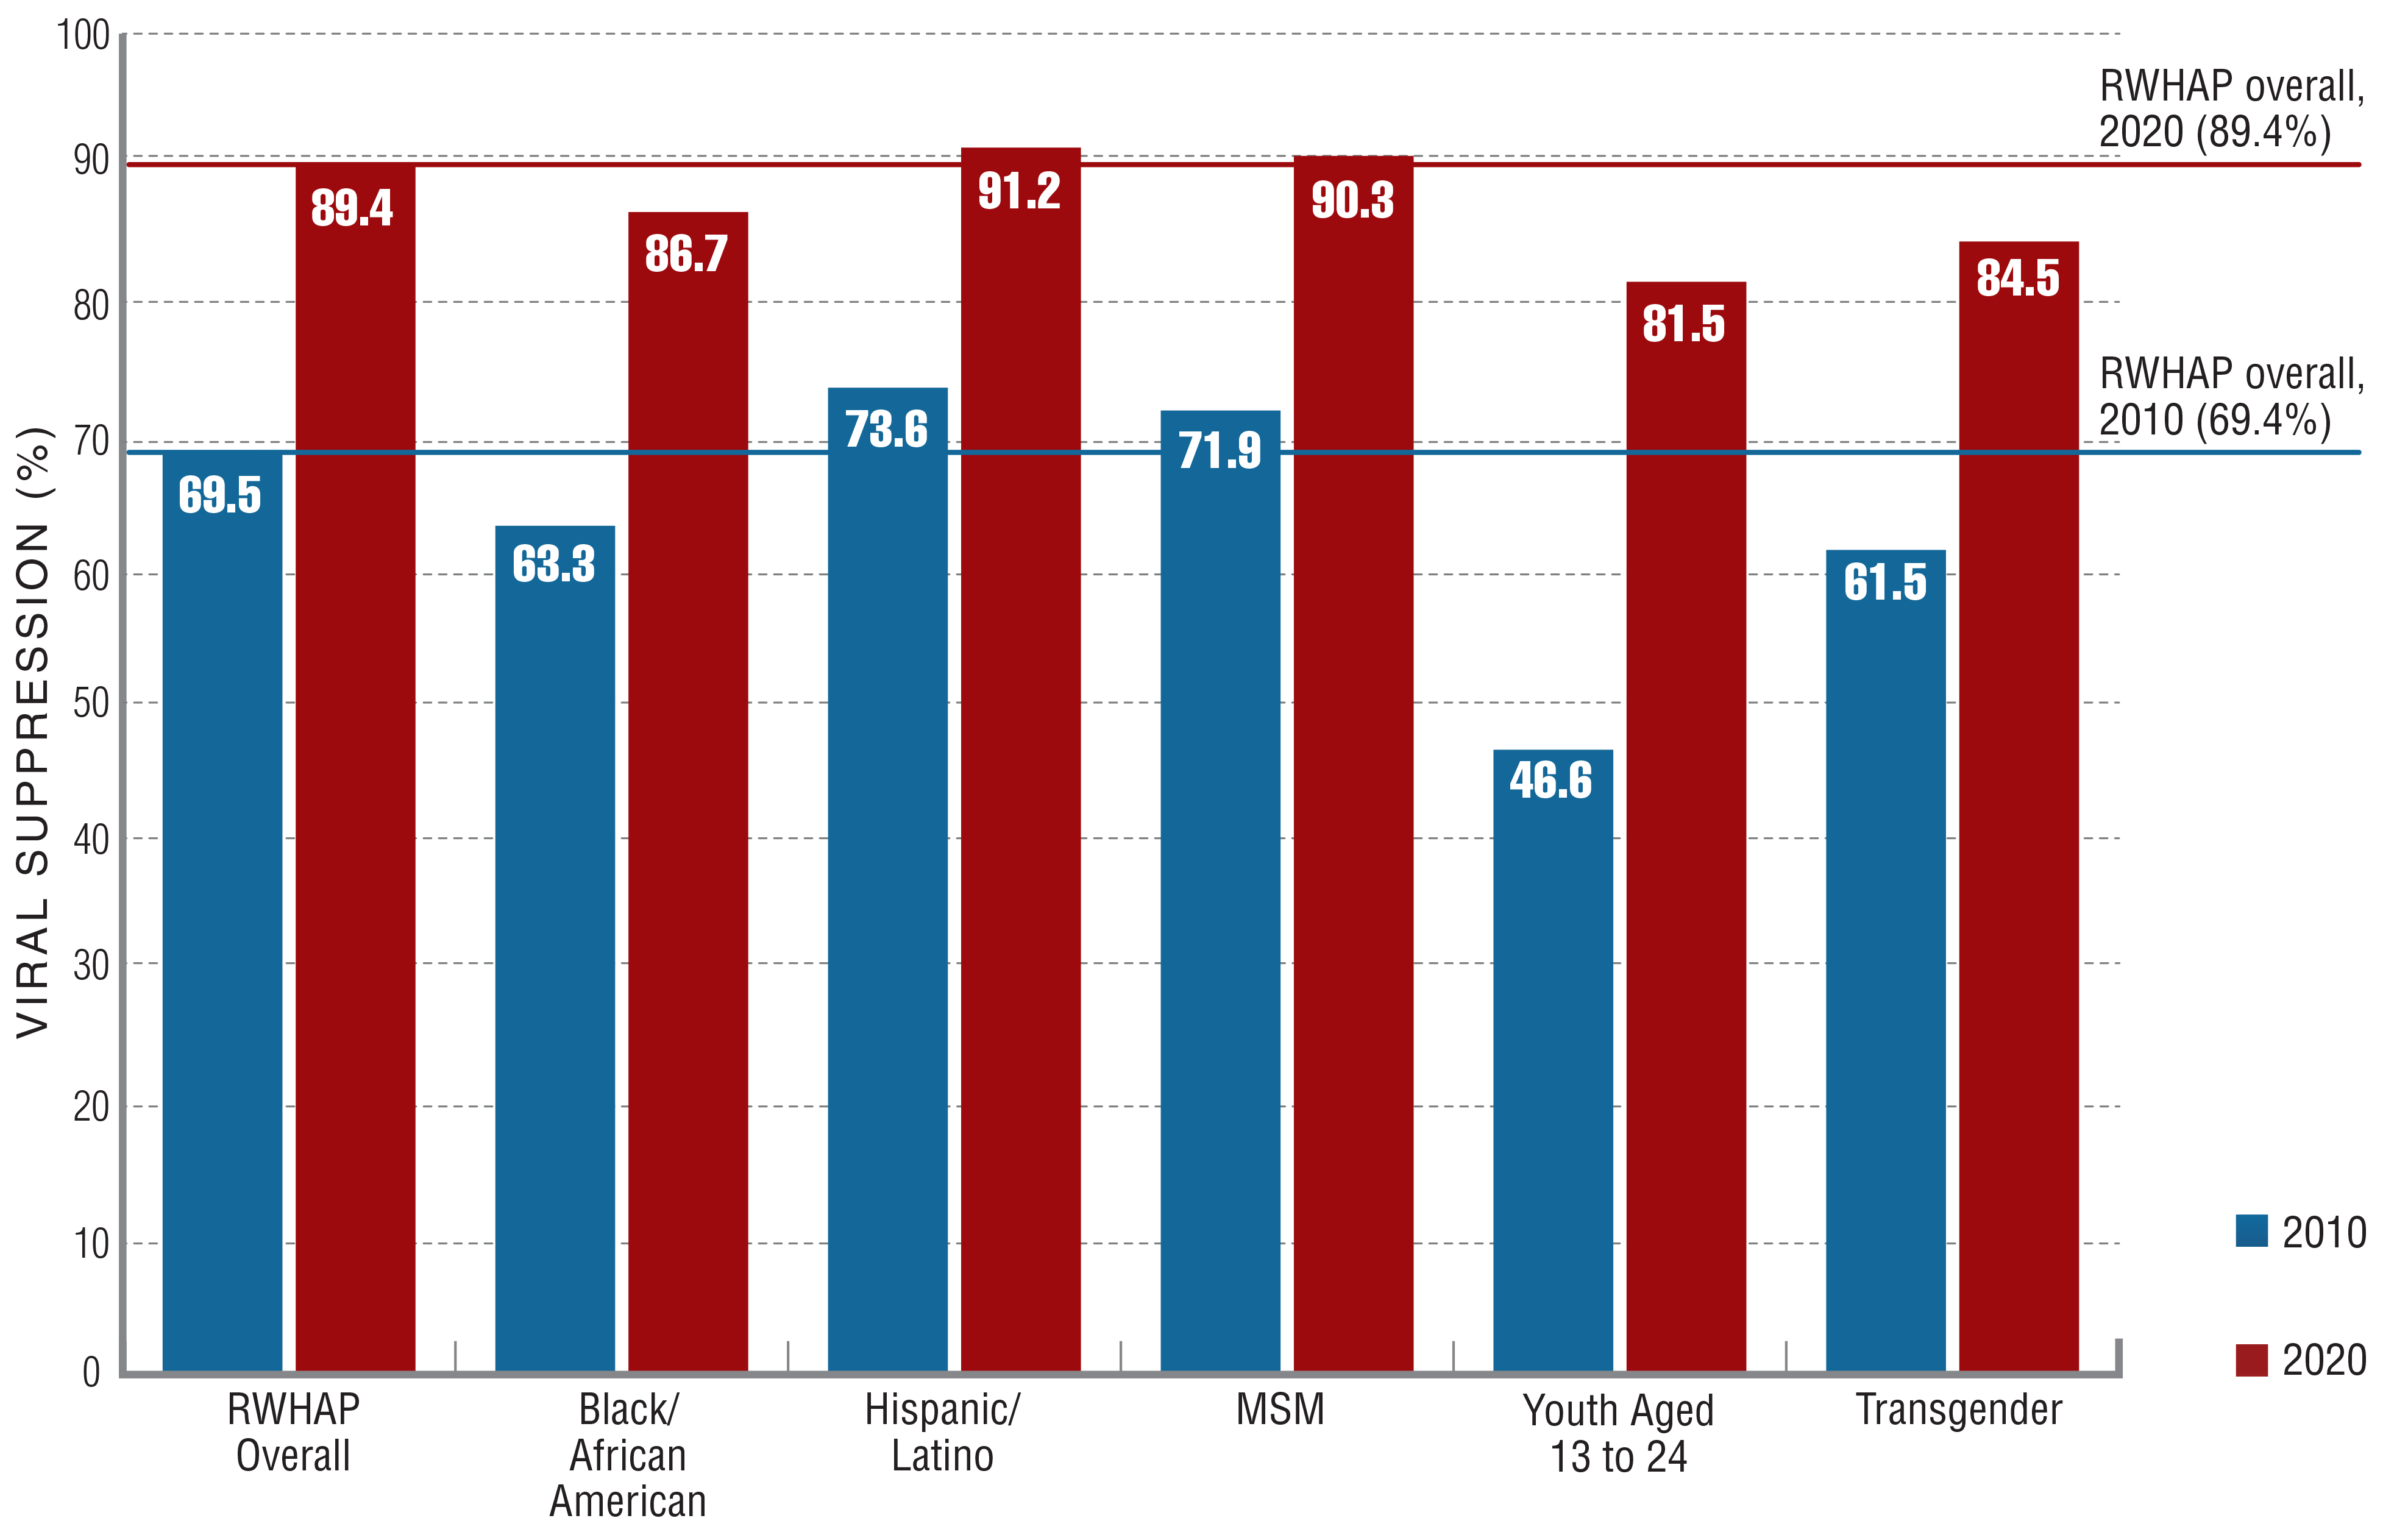 The chart shows viral suppression rates in 2010 and 2020 among selected Ryan White HIV AIDS Program (RWHAP) priority populations. The overall viral suppression rate for RWHAP clients was 69.5 percent in 2010 and 89.4 percent in 2010. Among Black/African American clients it was 63.3 percent in 2010 and 86.7 percent in 2020; among Hispanic/Latino clients, it was 73.6 percent in 2010 and 91.2 percent in 2020; among men who have sex with men (MSM) it was 71.9 percent in 2010 and 90.3 percent in 2020; among youth aged 13 to 24 it was 46.6 percent in 2010 and 81.5 percent in 2020; and among transgender clients, viral suppression rates were 61.5 percent in 2010 and 84.5 percent in 2020.